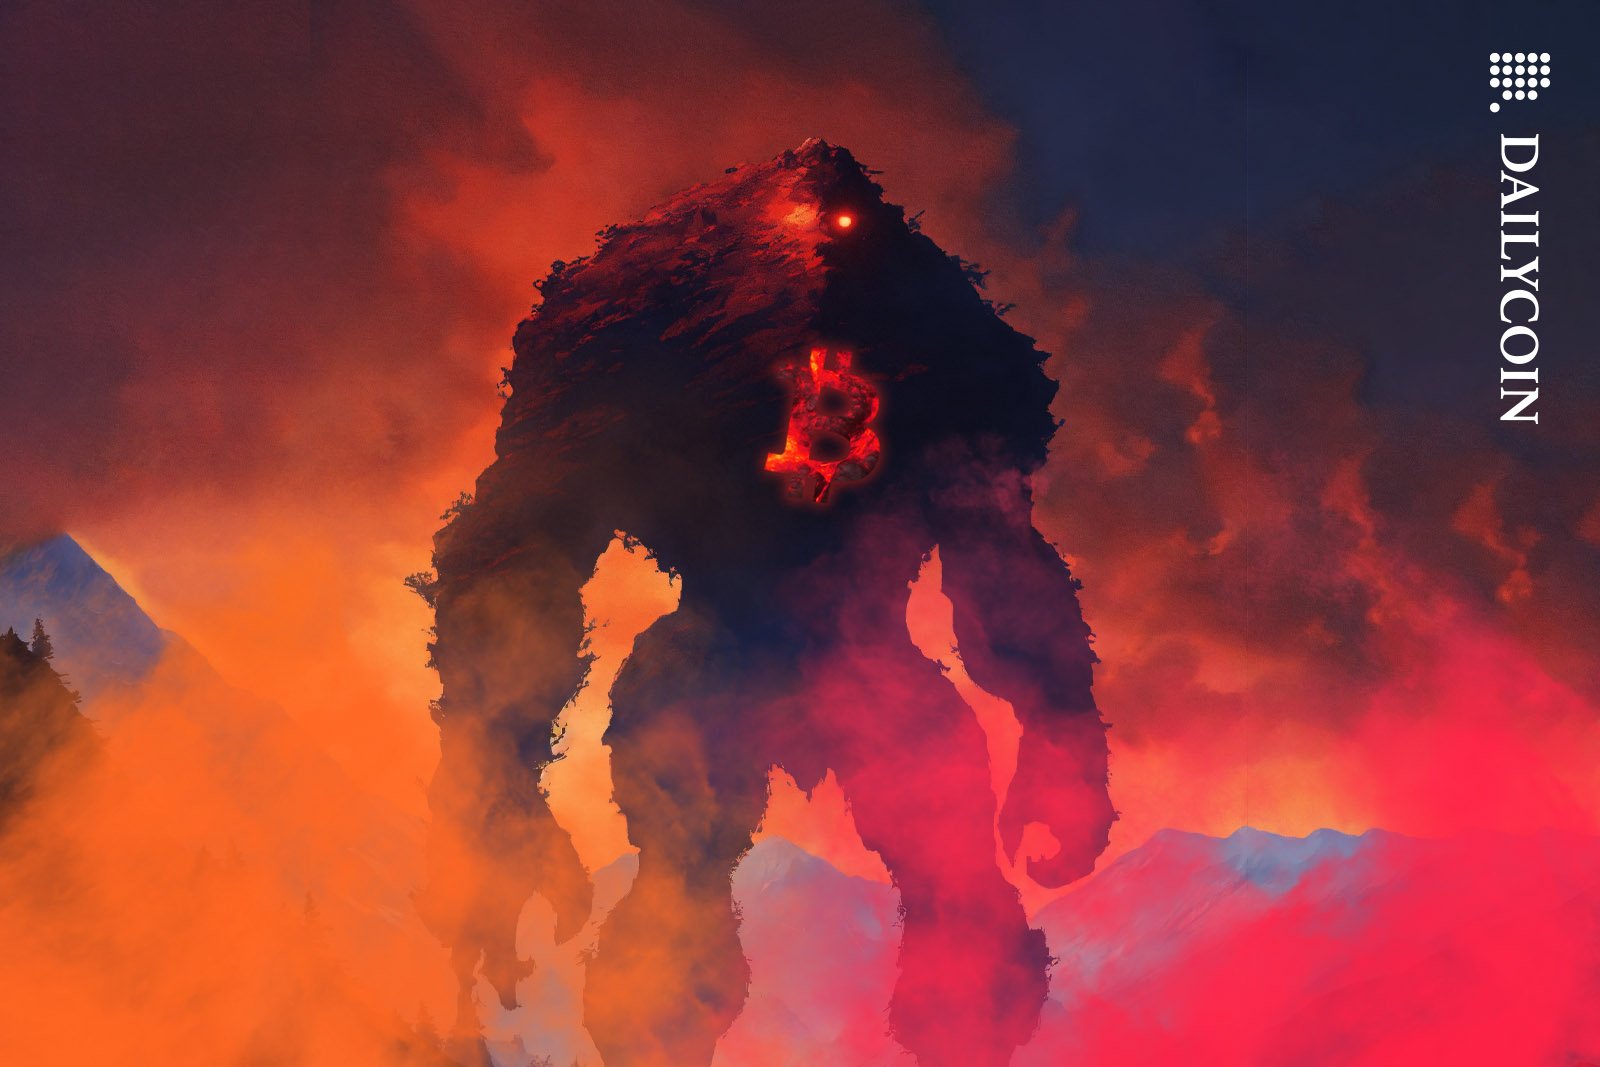 Huge giant Bitcoin monster waking up in a fiery and smokey environment.